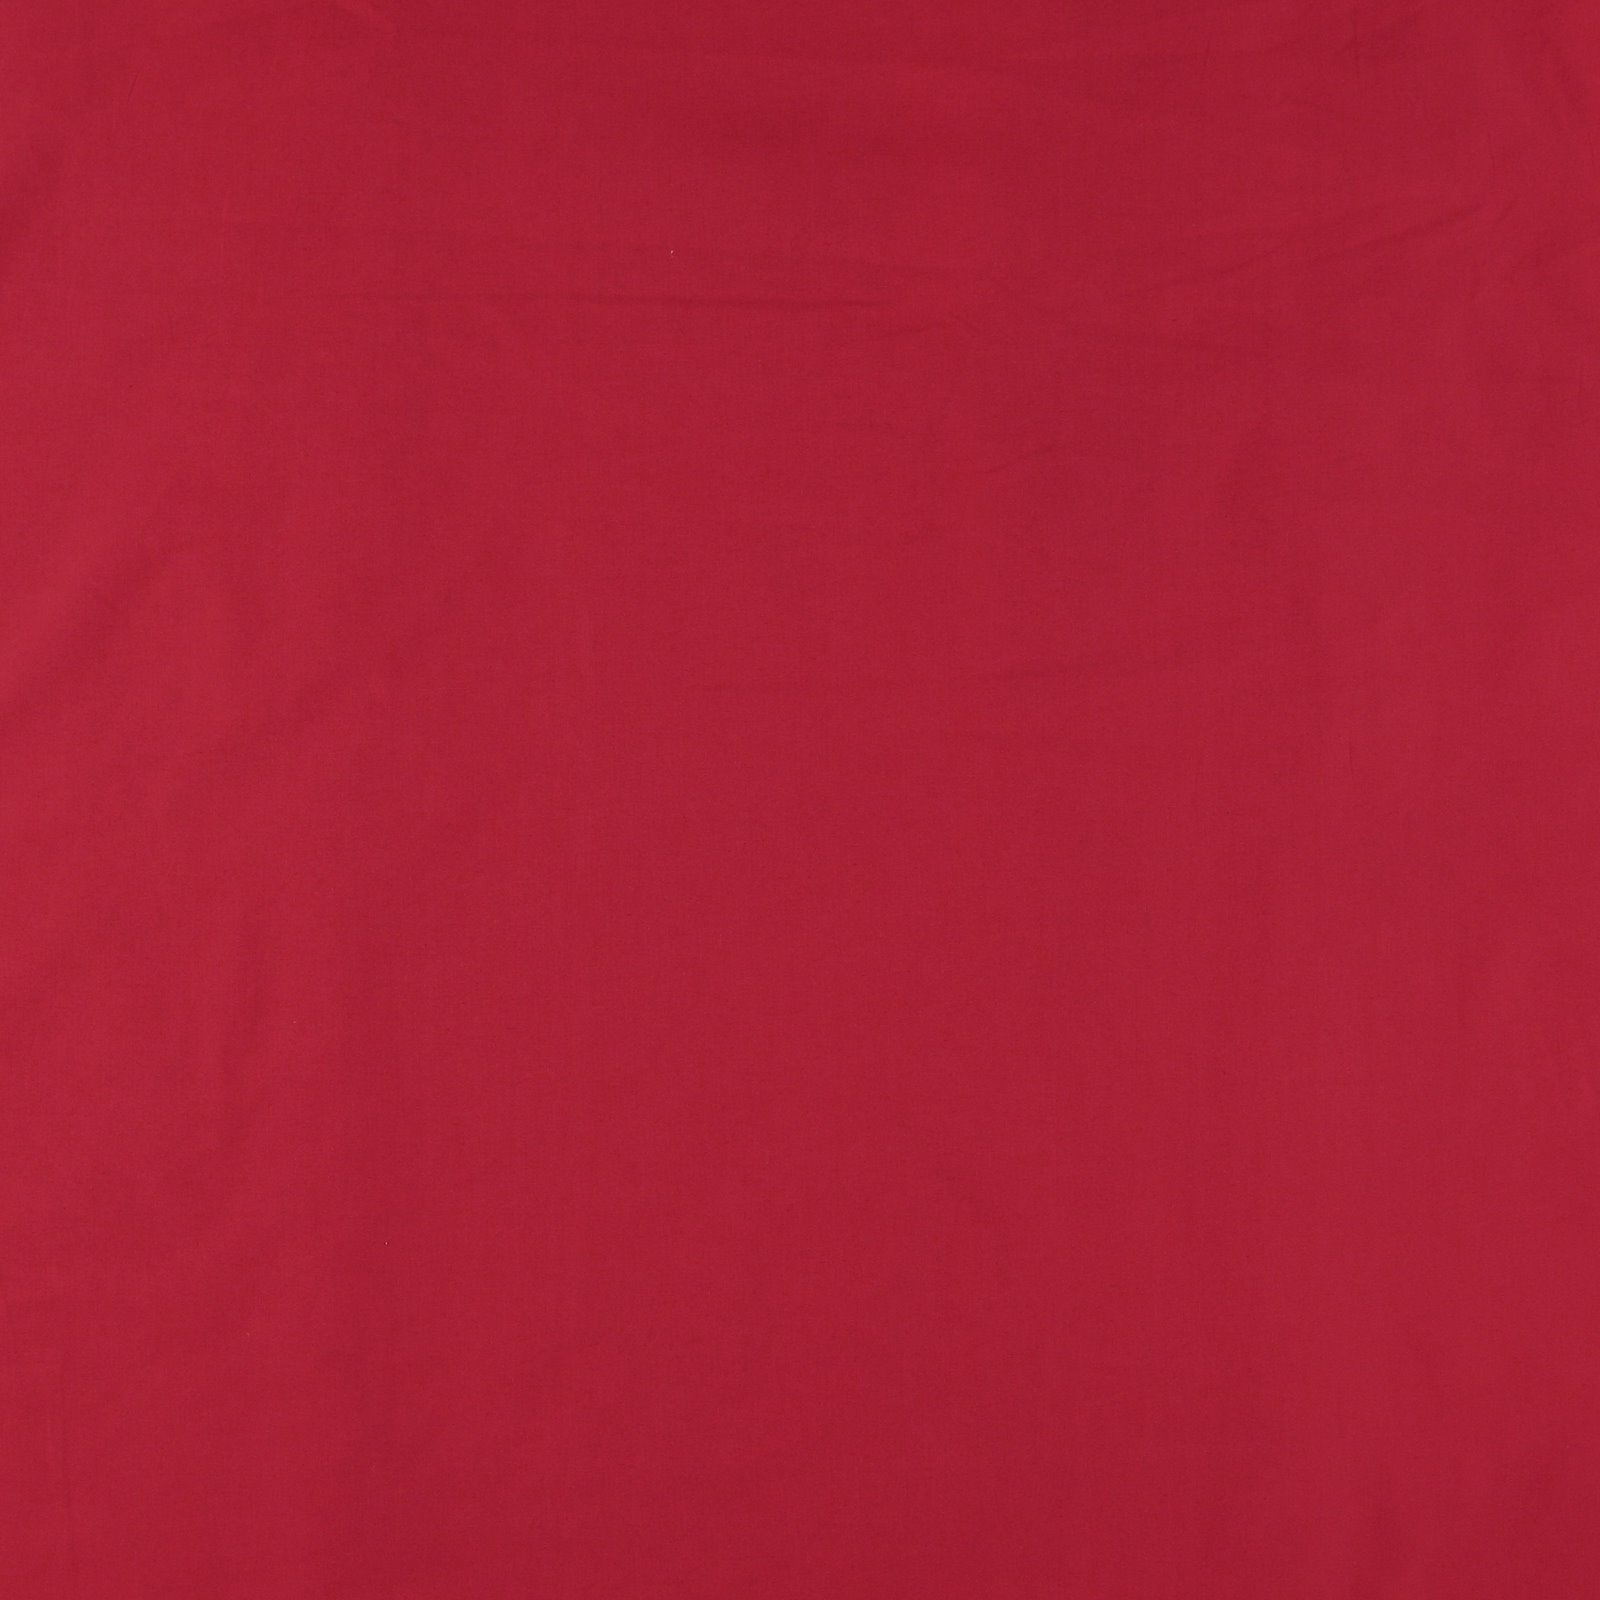 Organic cotton red 780390_pack_solid